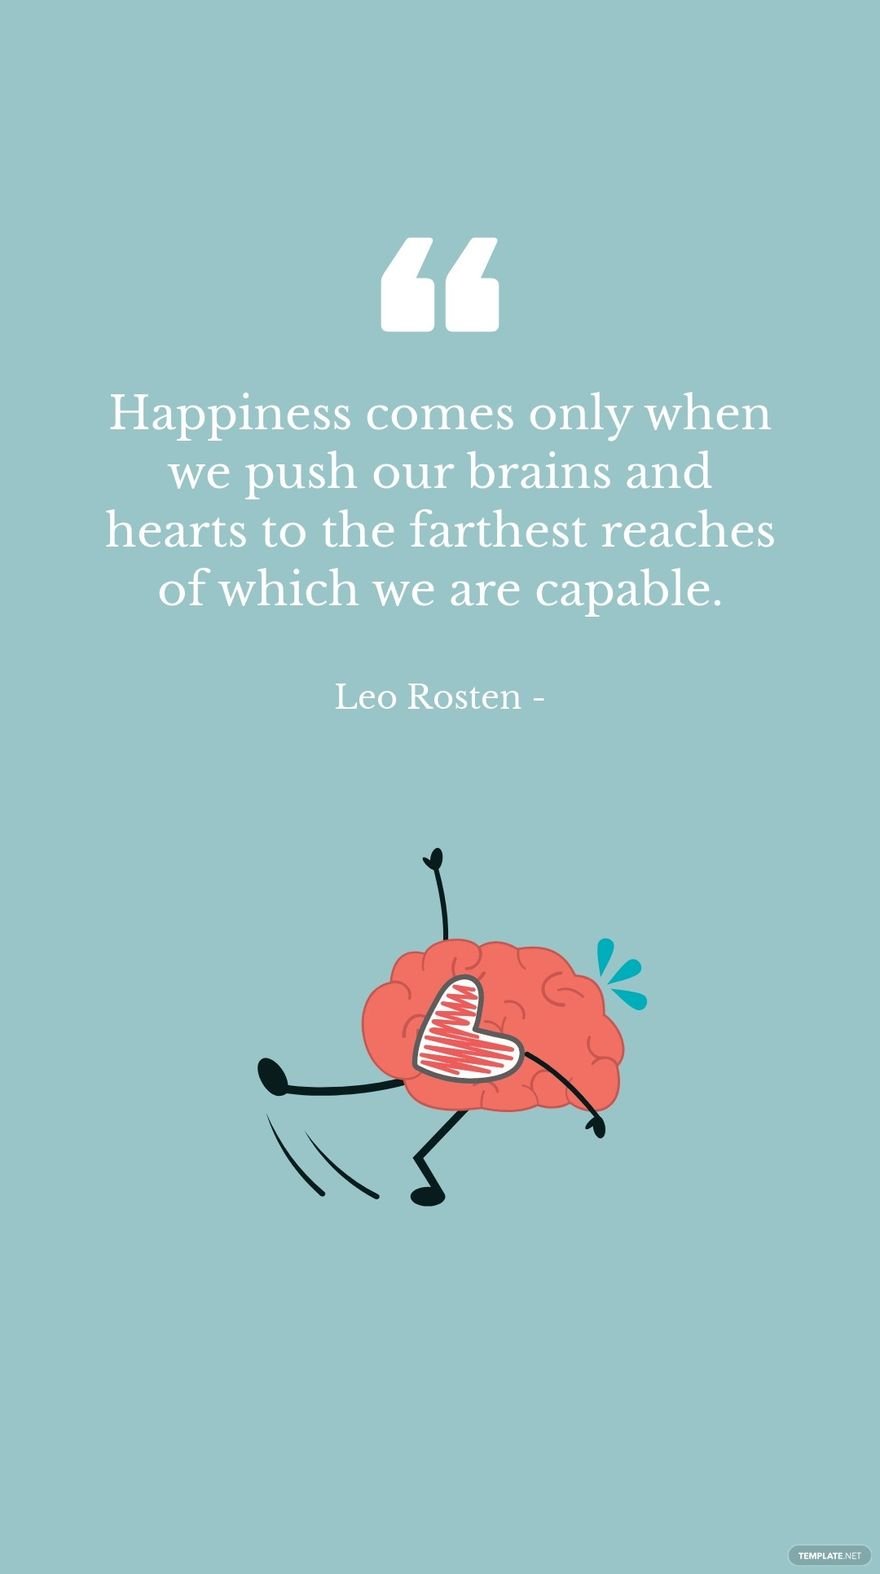 Free Leo Rosten - Happiness comes only when we push our brains and hearts to the farthest reaches of which we are capable.